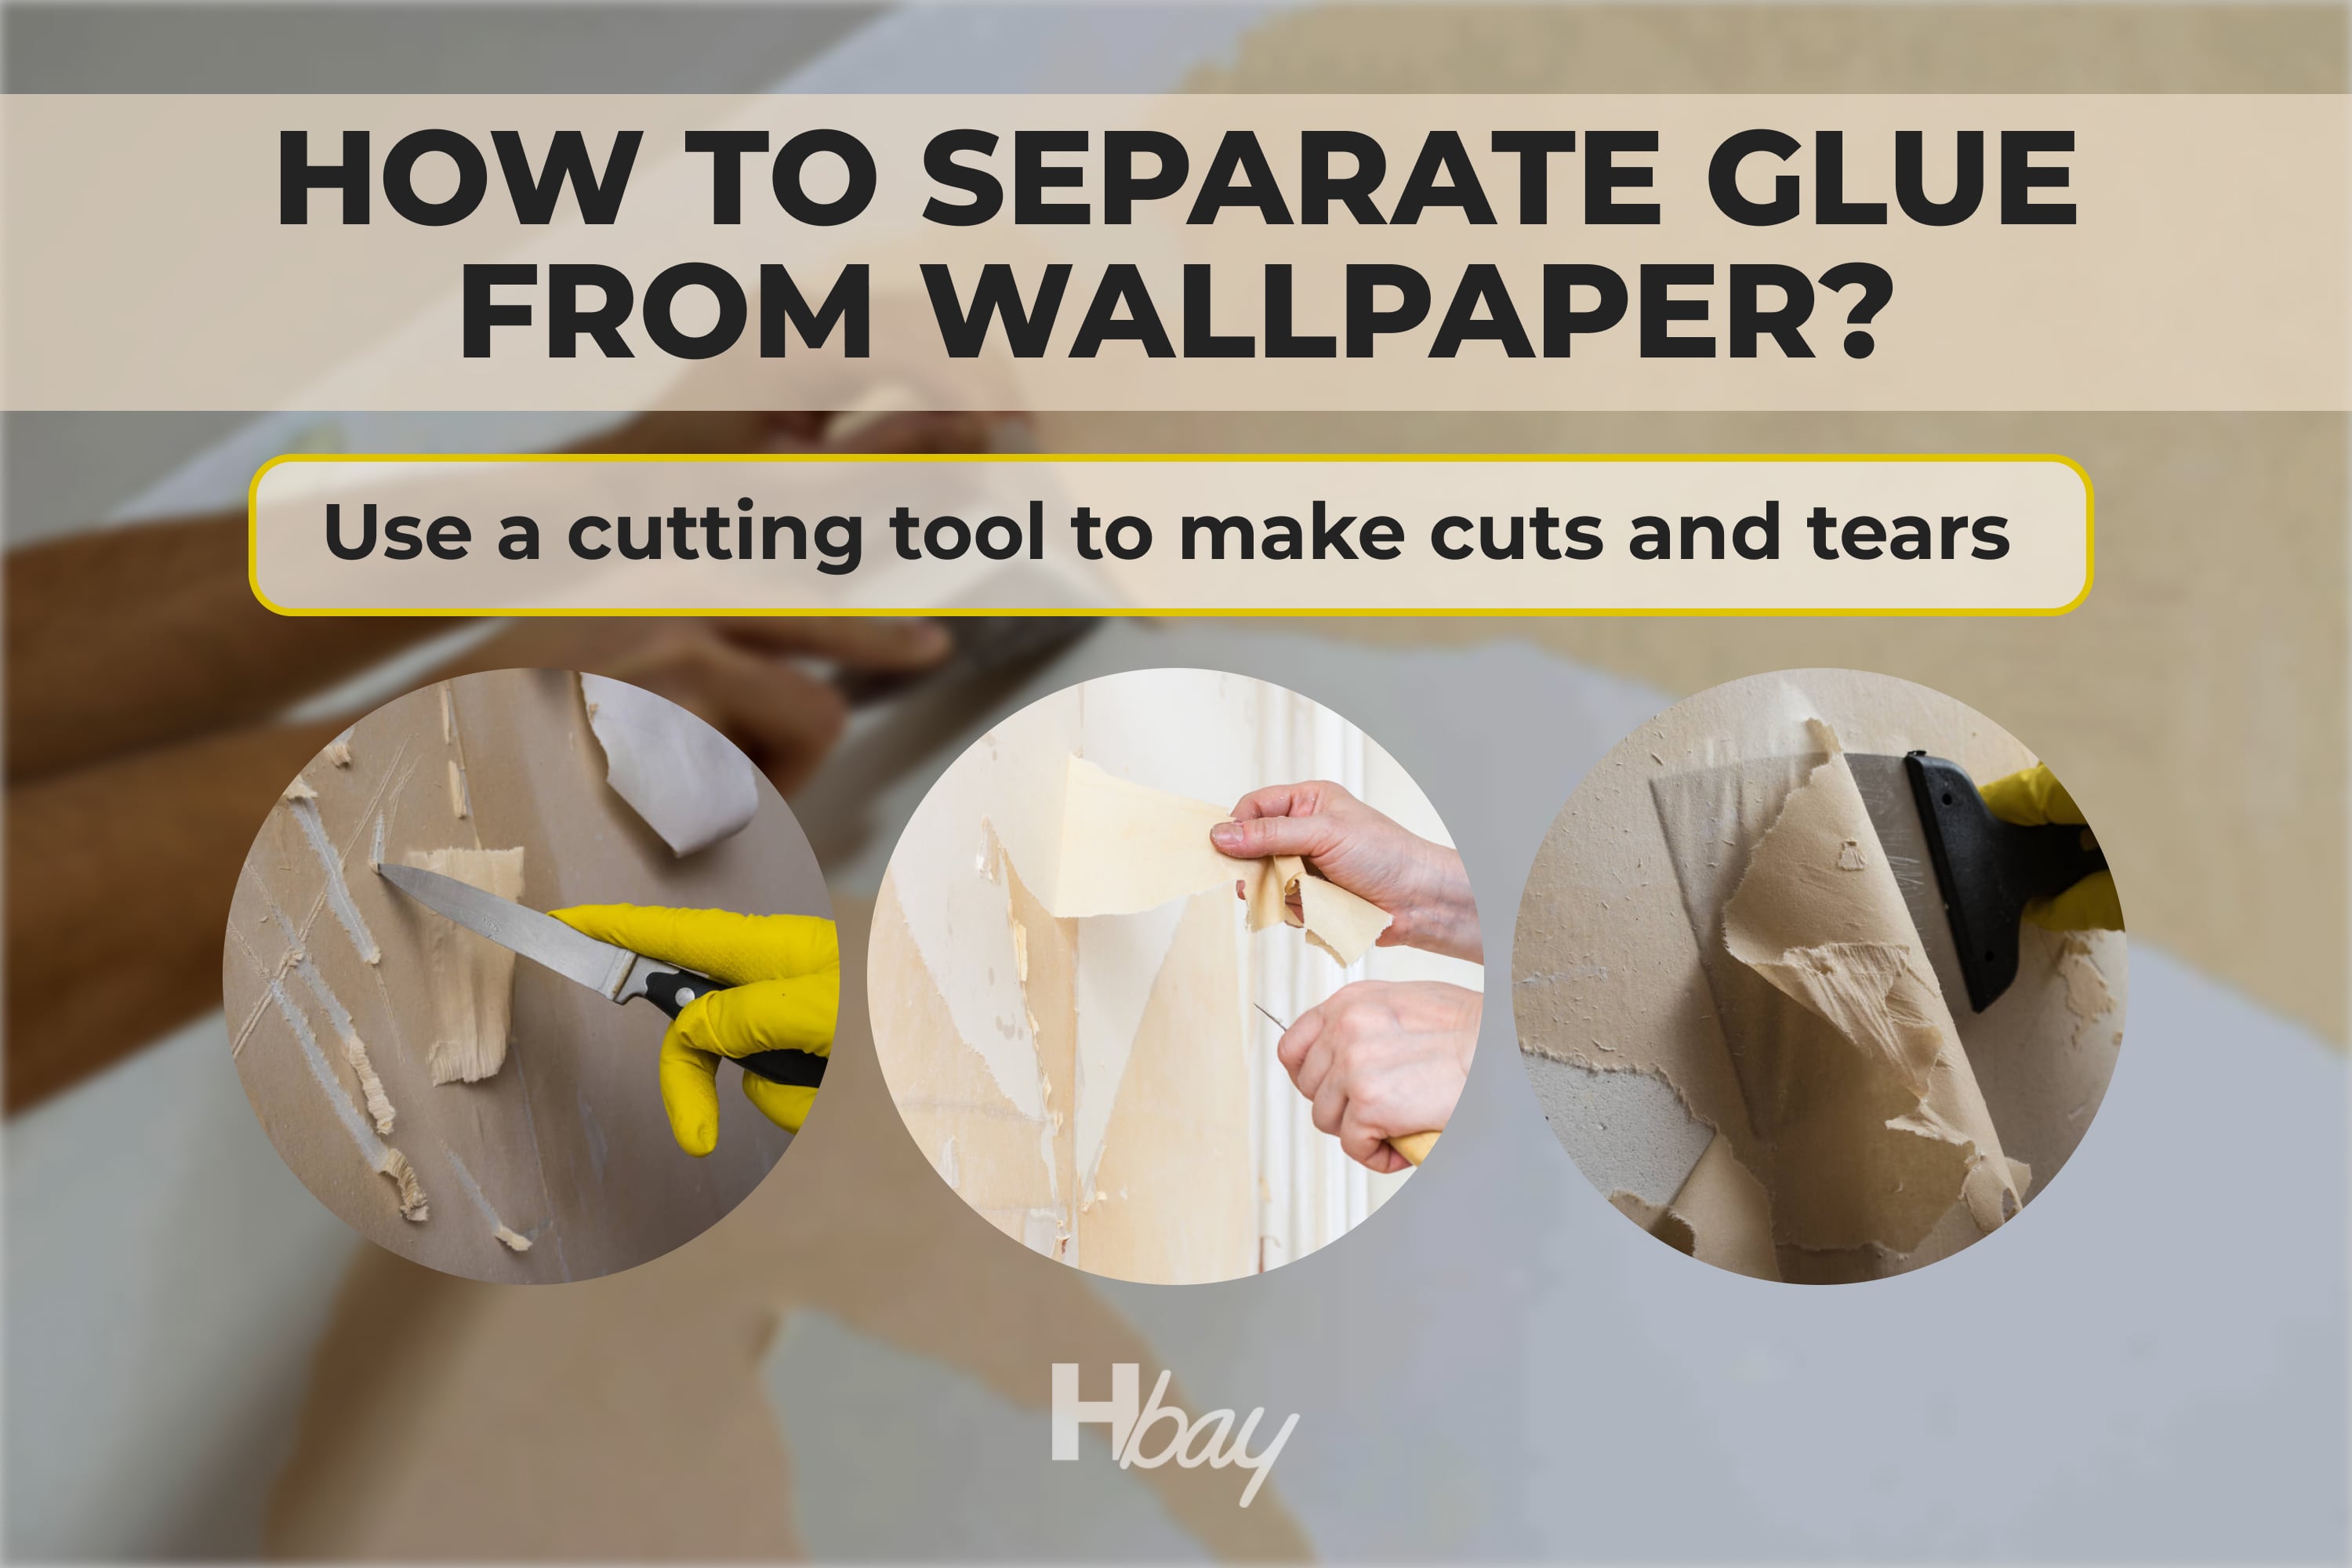 How to separate glue from wallpaper